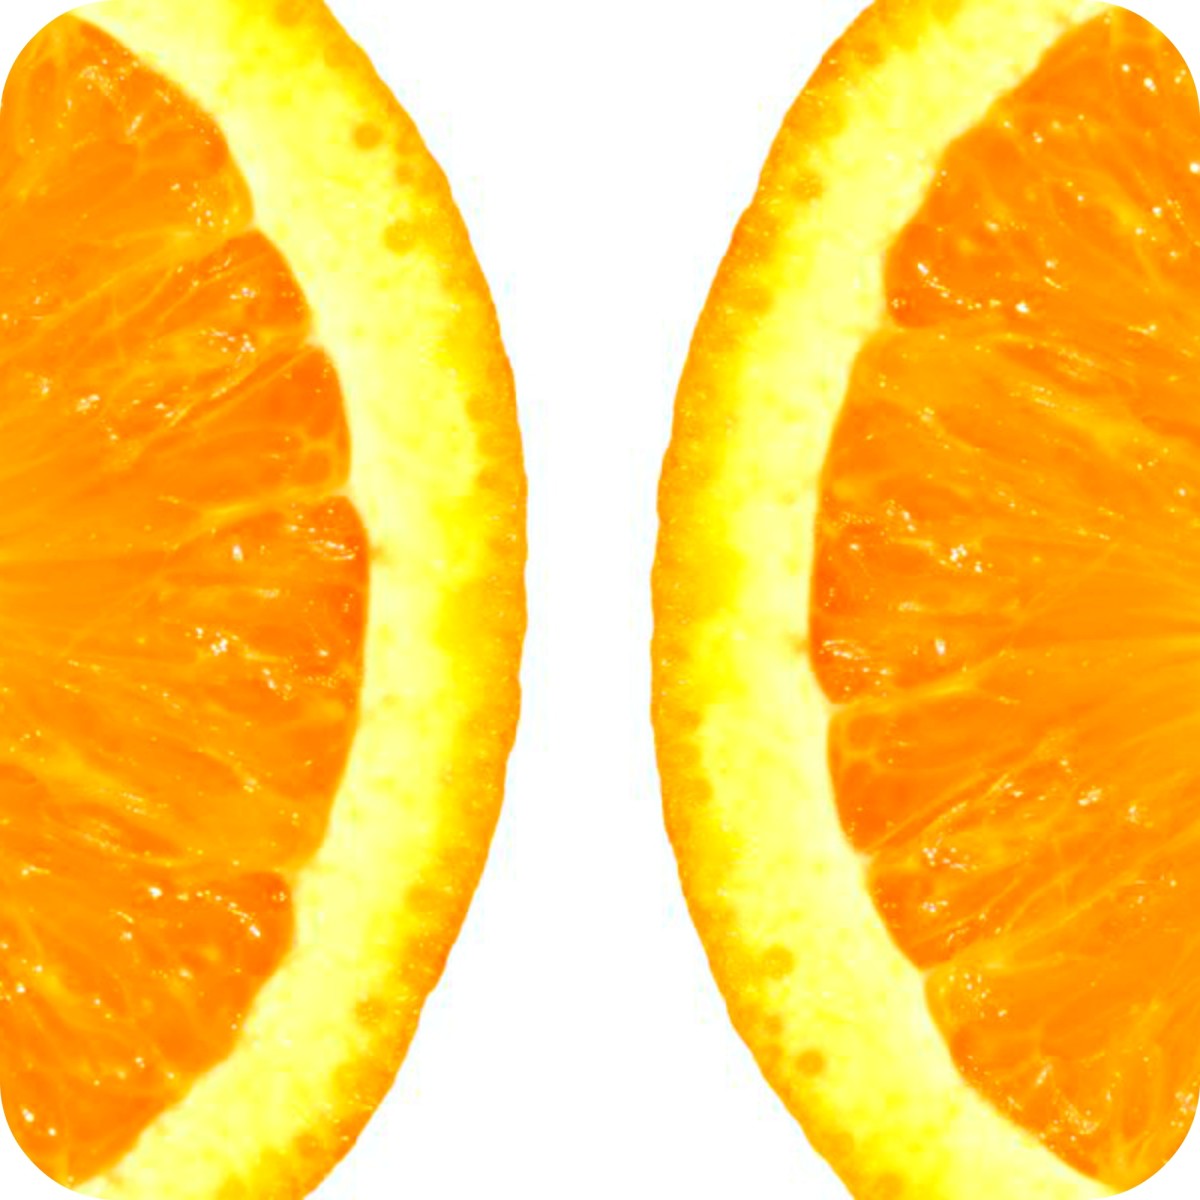 Oranges are rich in vitamin C, great for skin! 